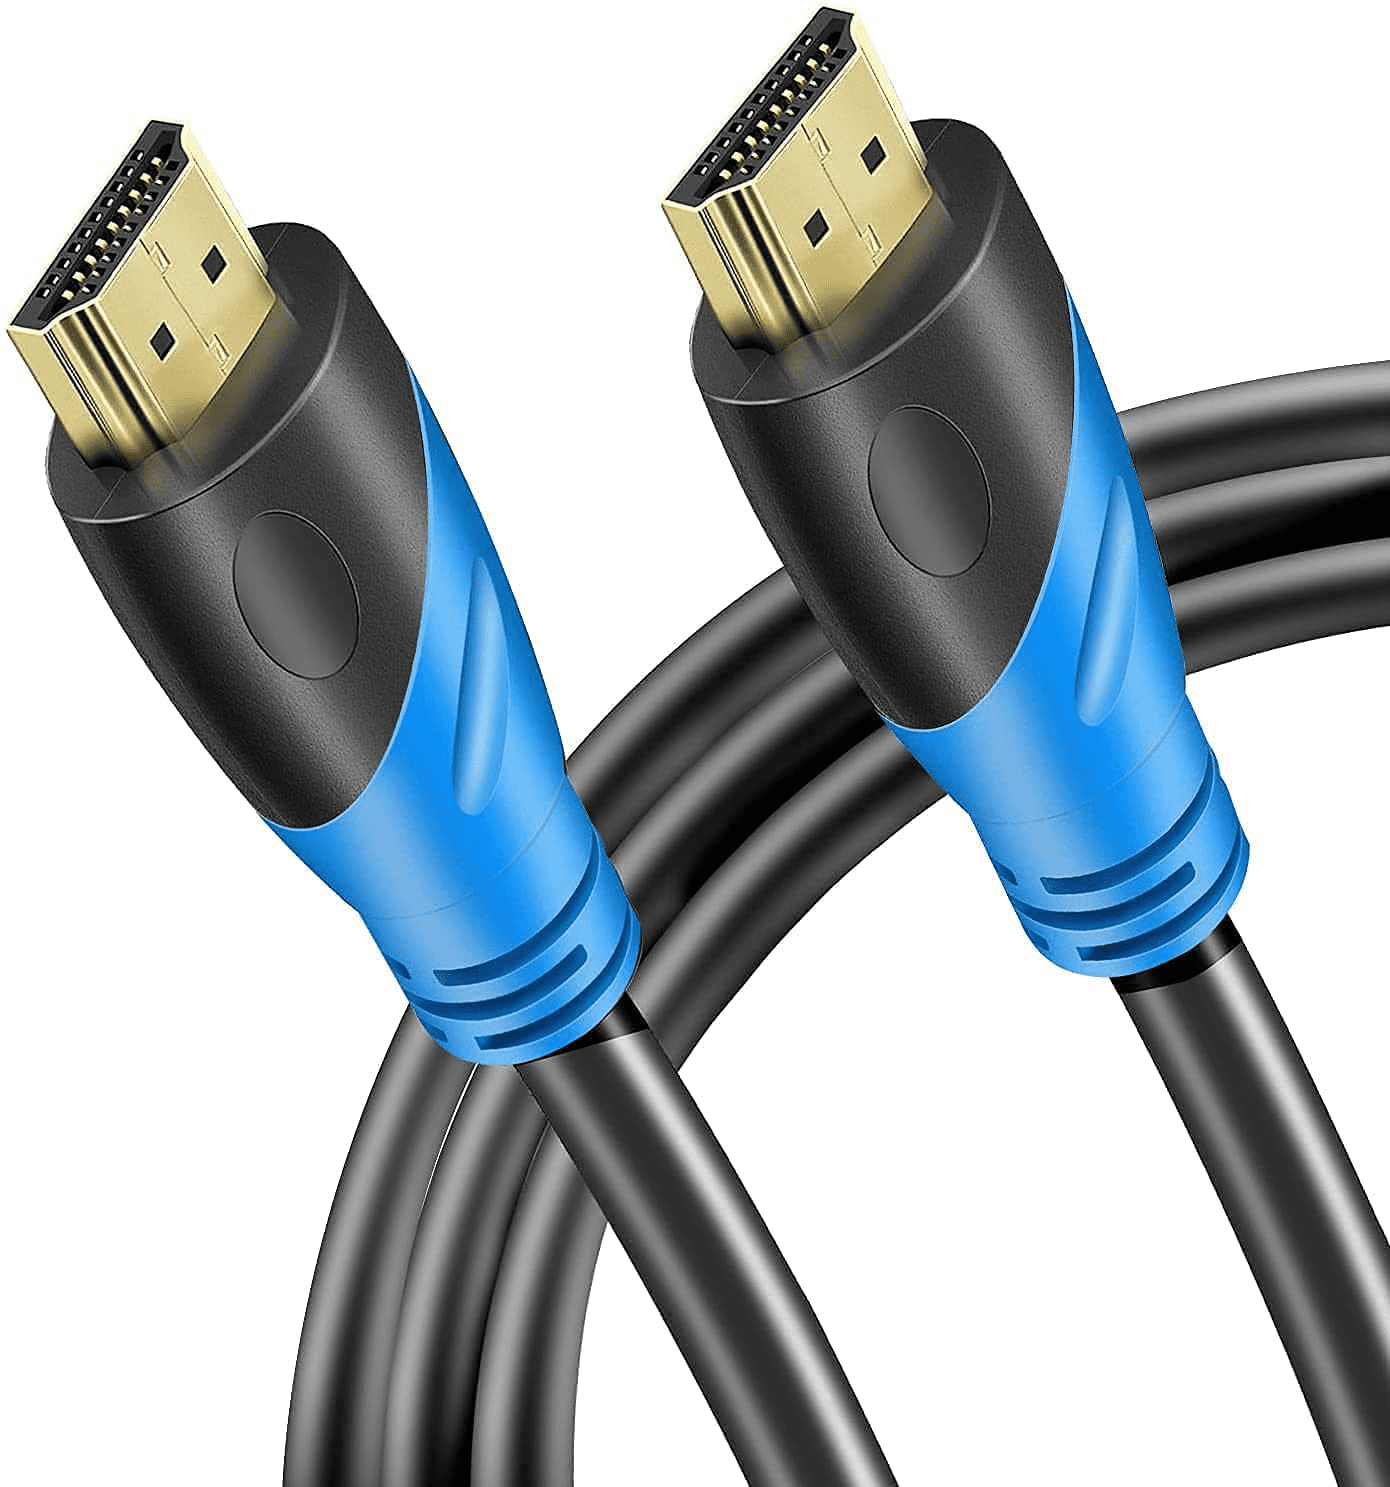 HDMI Male TO HDMI Male Cable,HDMI Cable 4K Ultra HD , HDMI 2.0 Thin Cable,  High Speed 18Gbps 4K@60Hz HDR, 3D, 2160p, 1080p, HDCP 2.2, ARC, HDMI Cabl